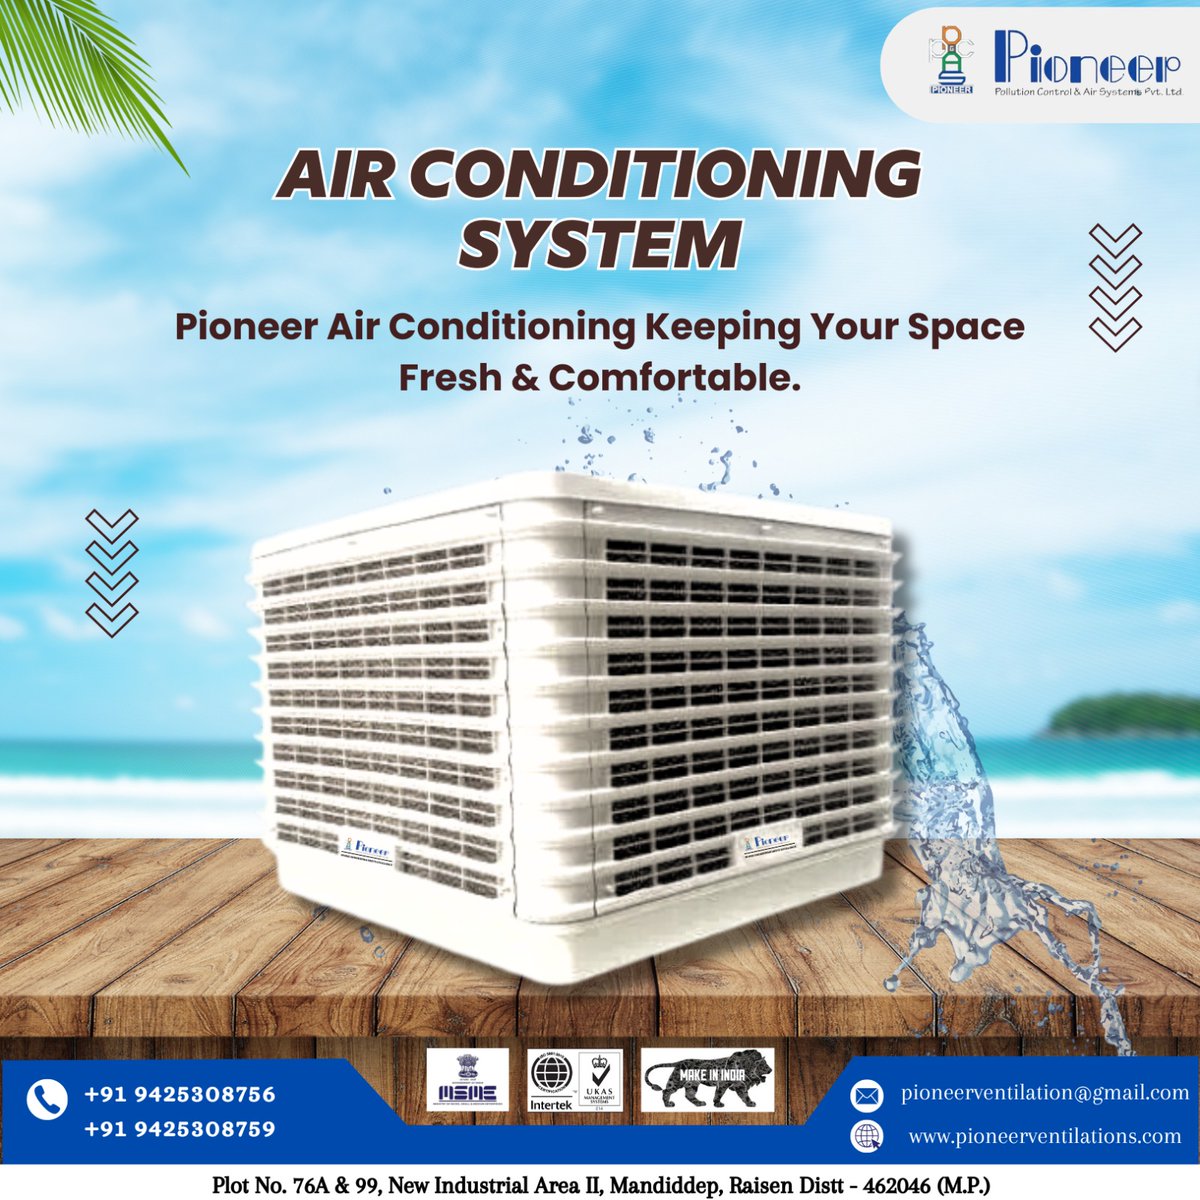 Stay Cool, Stay Pioneer: Embrace Comfort with Pioneer's Air Conditioning System.
.
.
#PioneerCooling #AirConditioningPerfection #CoolComfort #EfficientCooling #HomeClimateControl #UltimateCoolingSolution #PioneerTechnology #CoolingInnovation